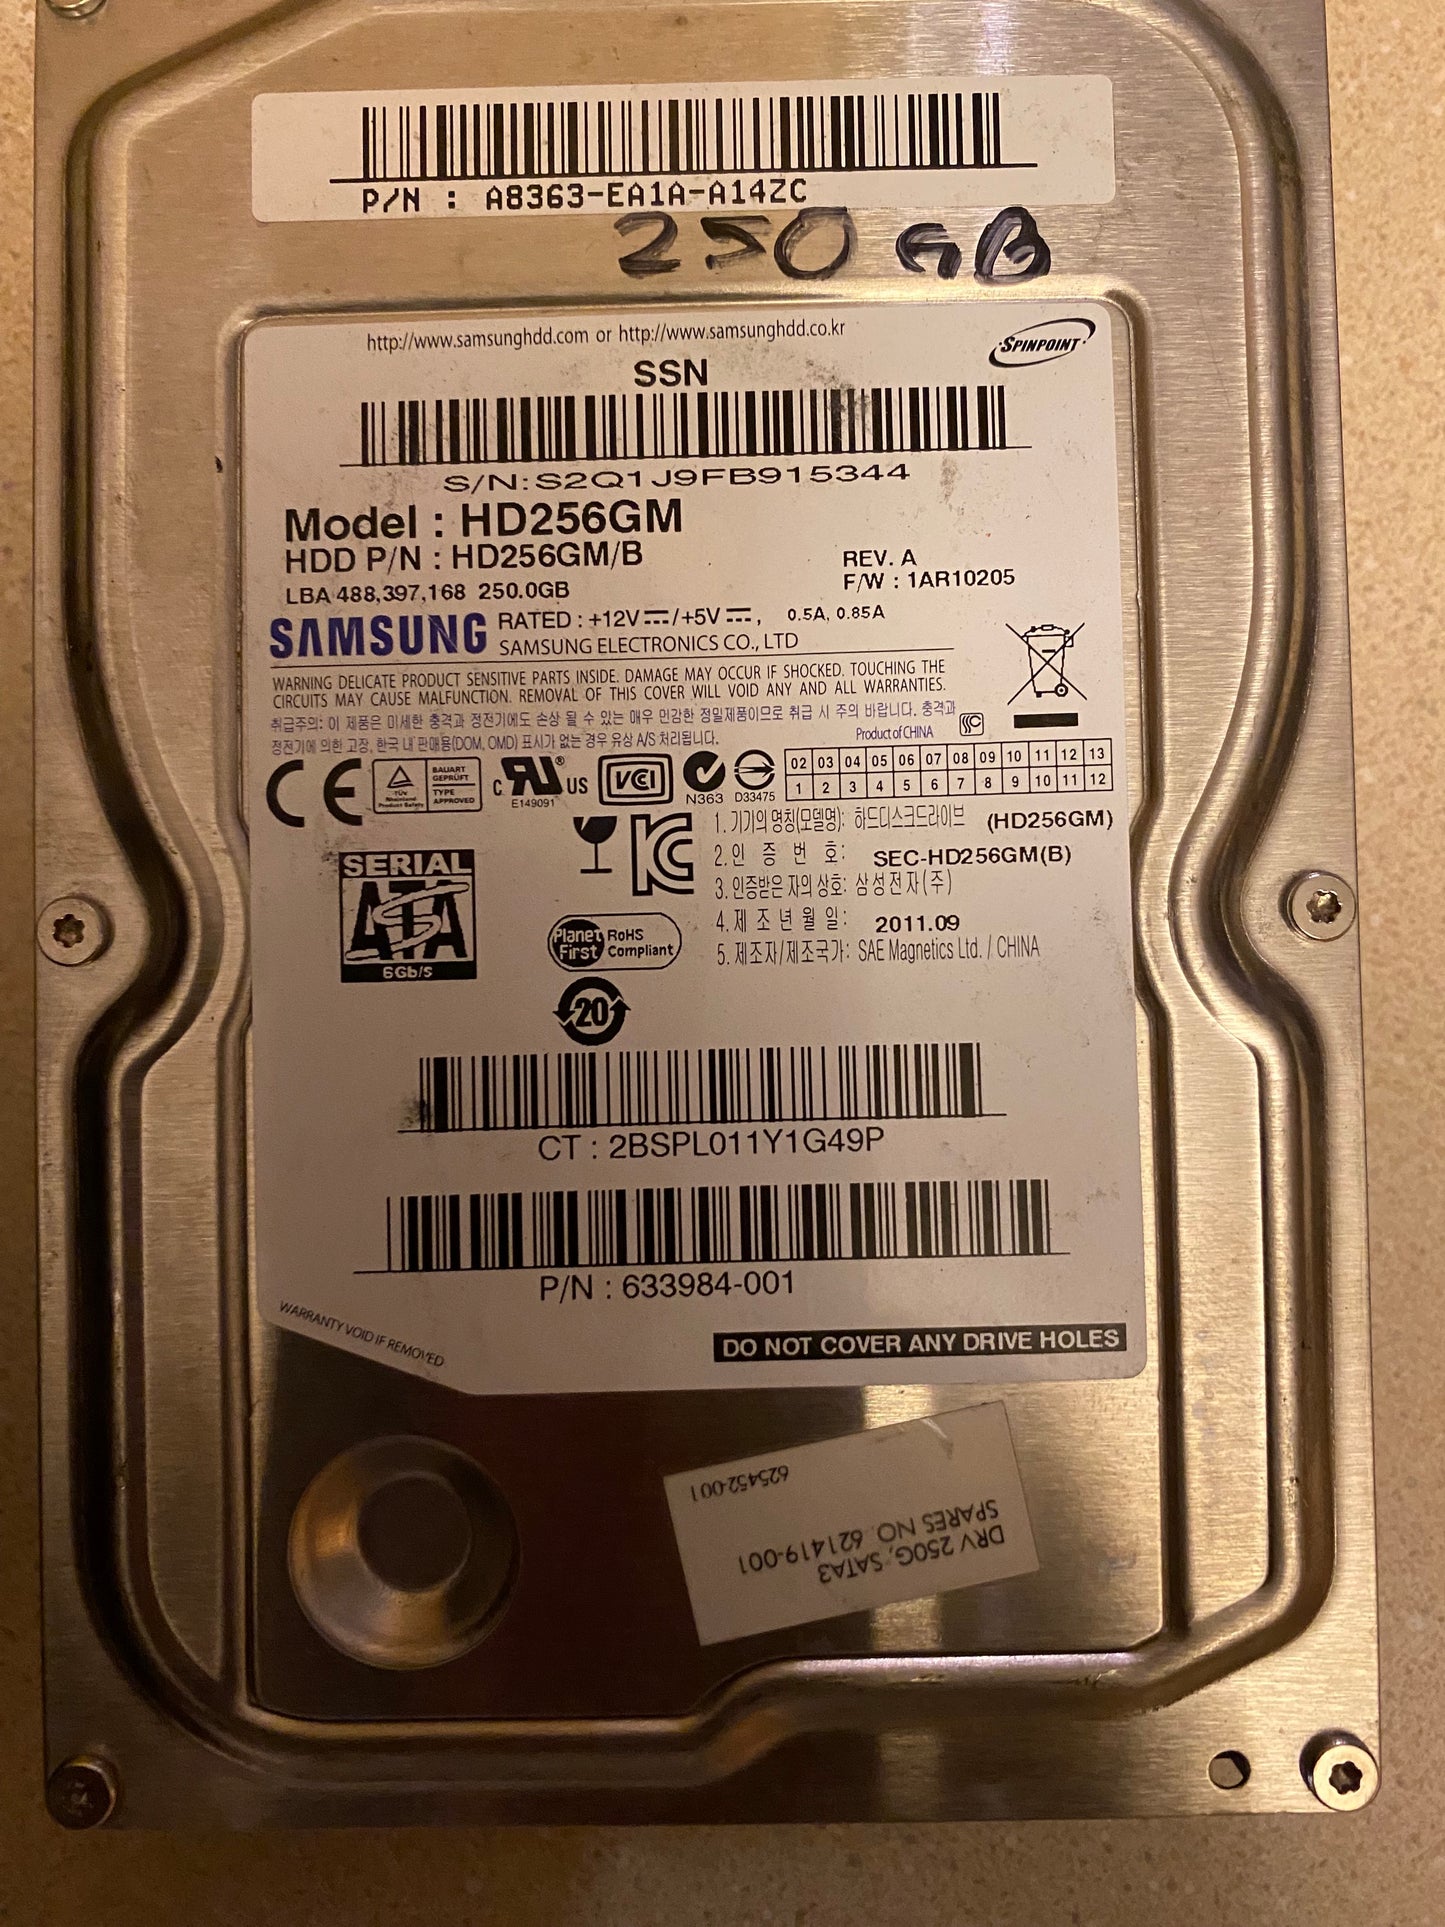 Pre-Owned Samsung 250 GB SATA Spinpoint HD256GM 7200rpm 16MB 3.5 " Internal HDD